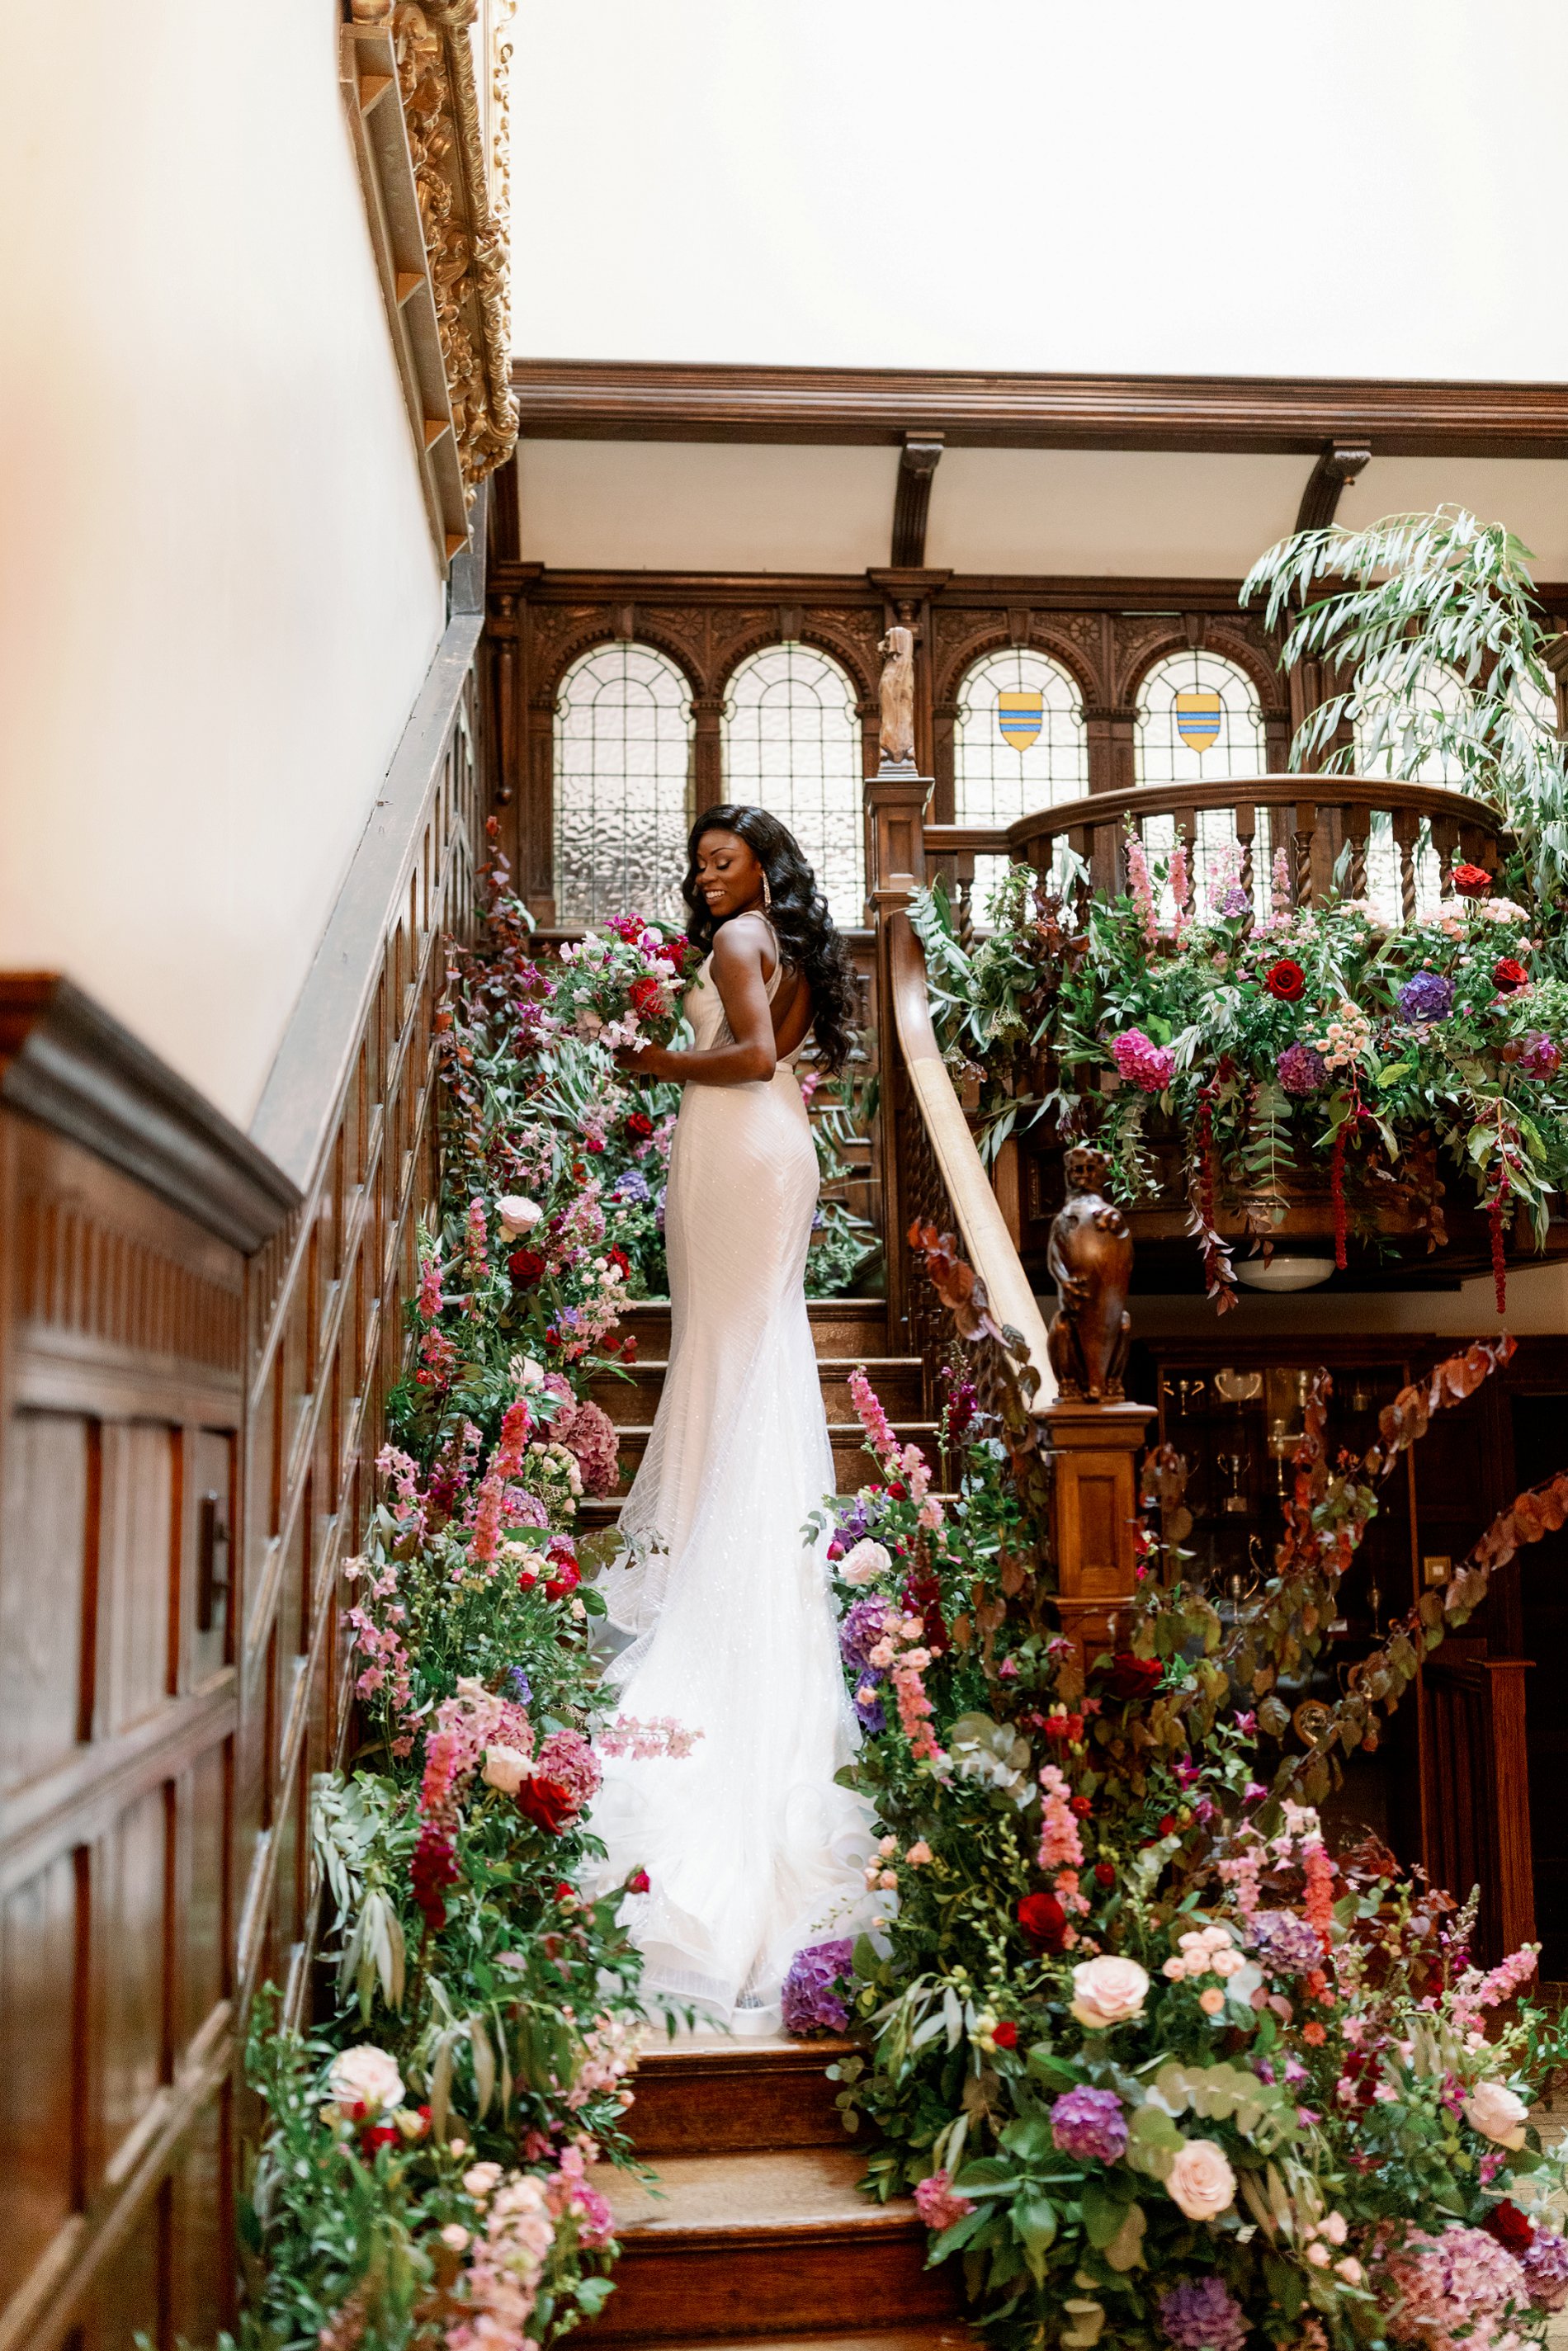 Forever Yours Styled Shoot (c) Camilla J. Hards and Courtney Dee Photography (22)